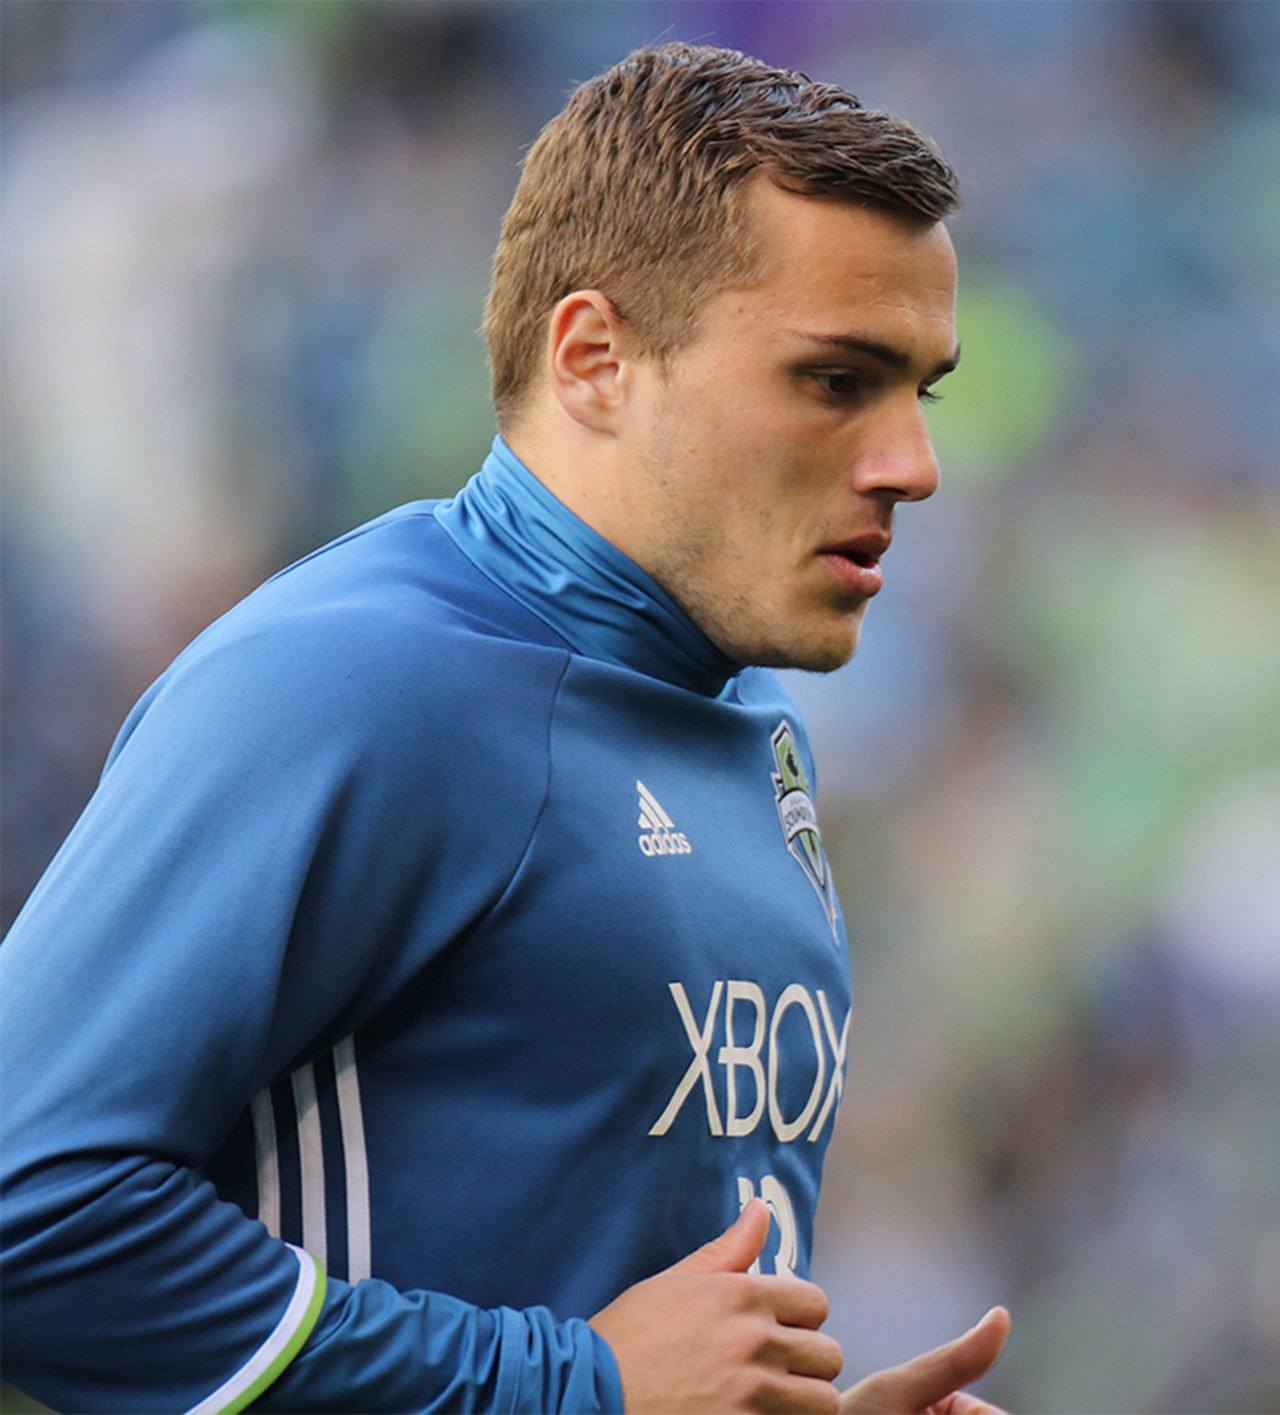 Seattle Sounders FC forward and former Mercer Island soccer standout Jordan Morris was named MLS Rookie of the Year on Wednesday. Photo courtesy of Dan Poss/Sounders FC Communications.